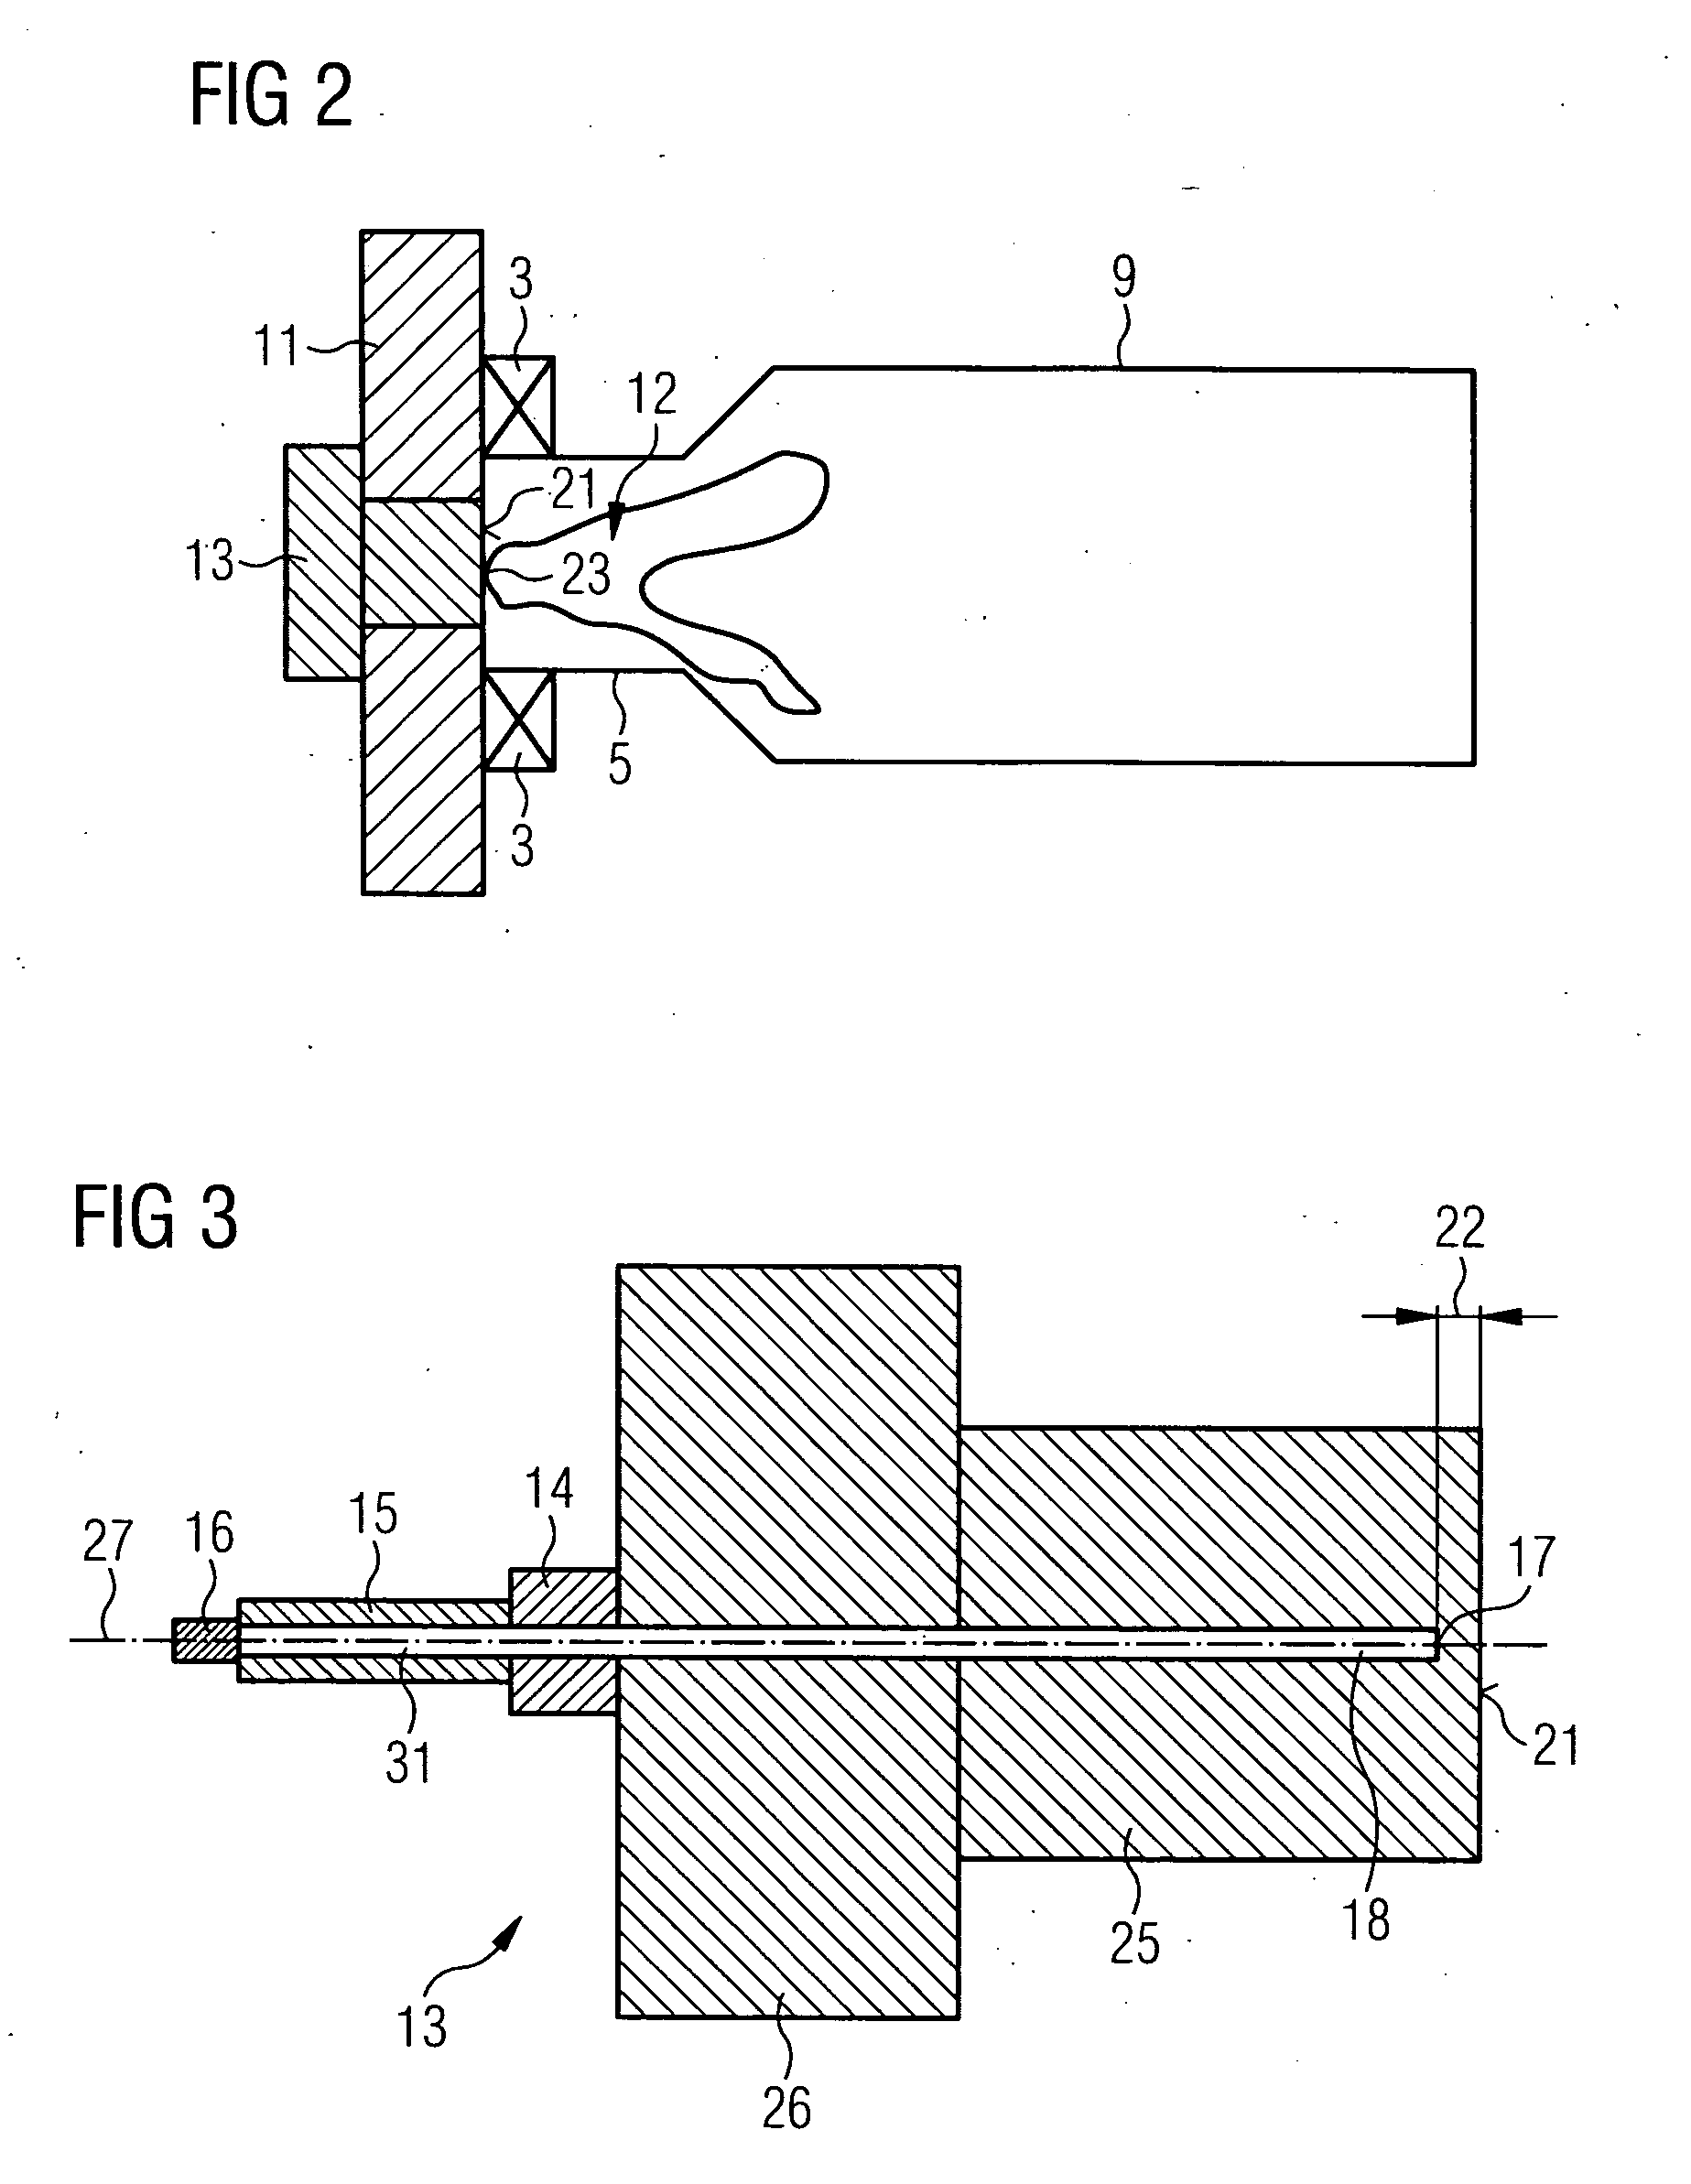 Monitoring of a flame existence and a flame temperature